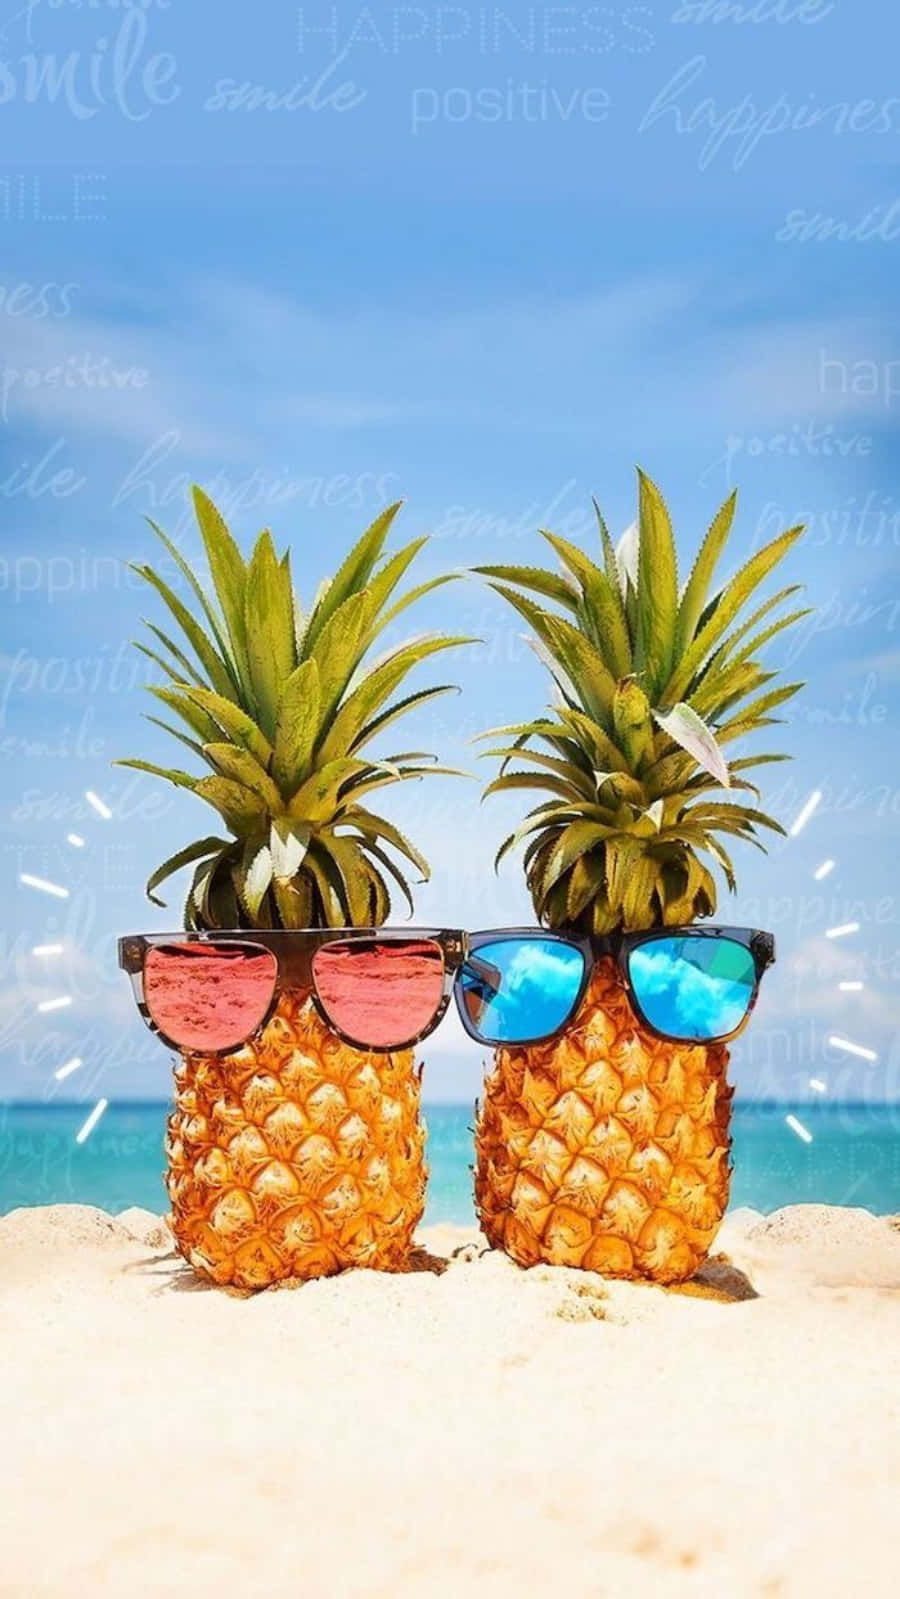 Two Pineapples Wearing Sunglasses On The Beach Wallpaper